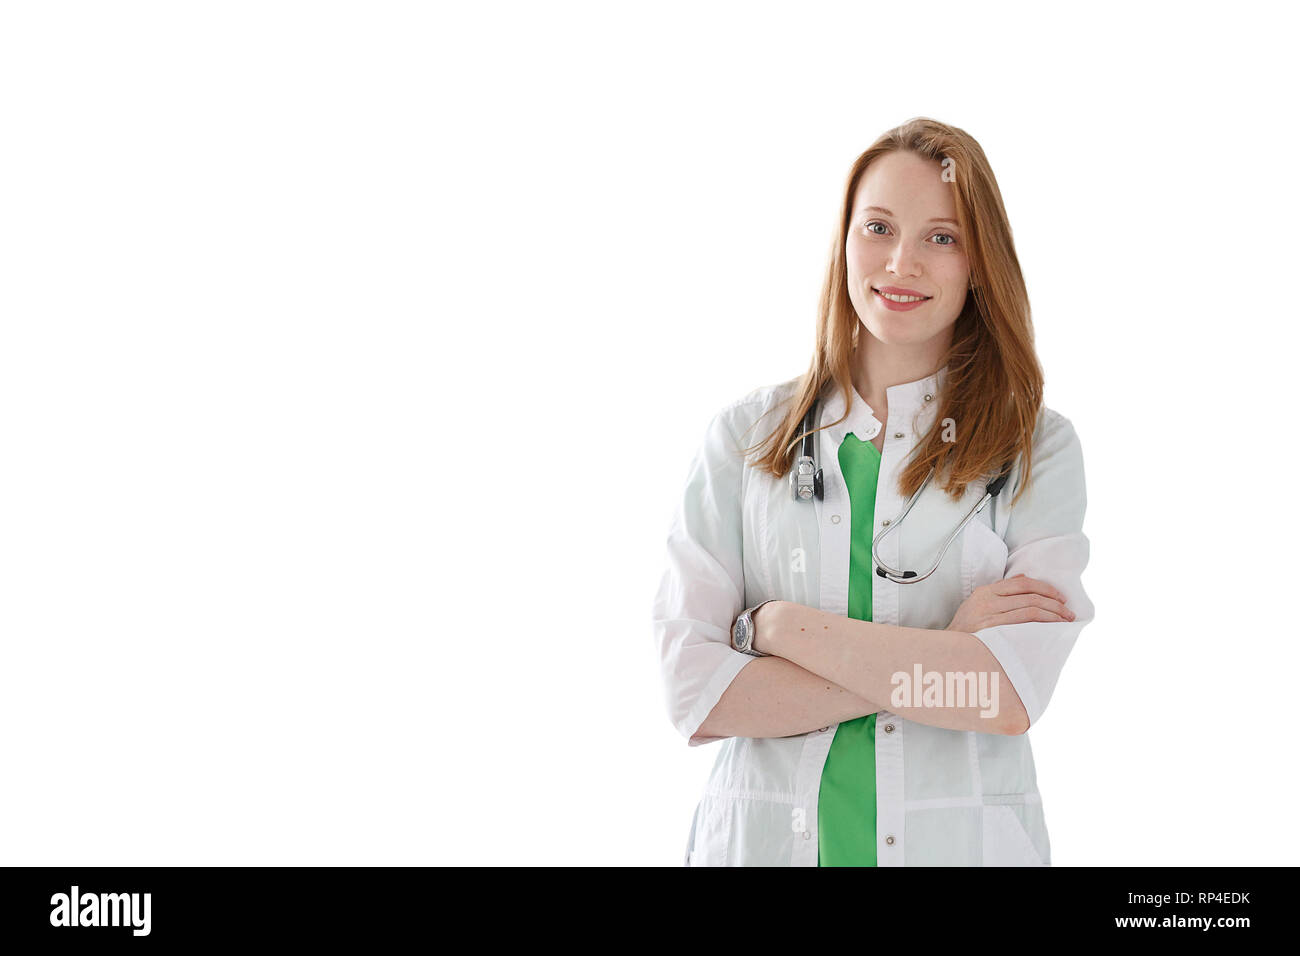 Portrait of smiling woman doctor with stethoscope in medical gown isolated on white background. Stock Photo